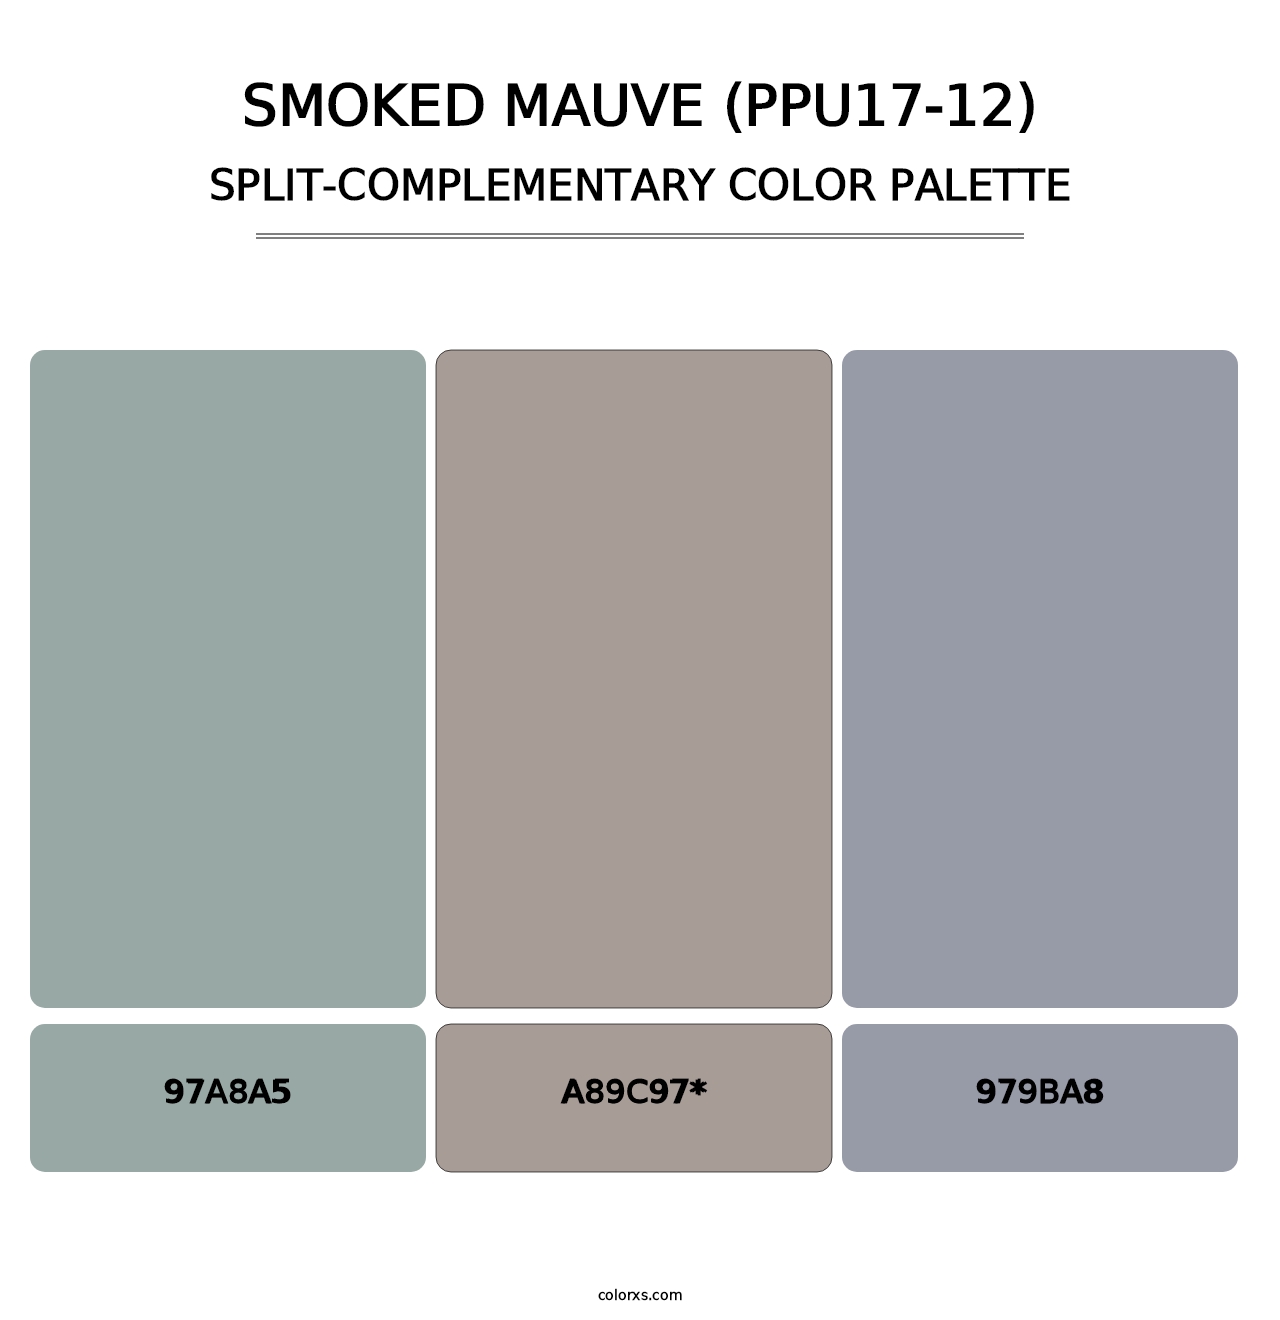 Smoked Mauve (PPU17-12) - Split-Complementary Color Palette